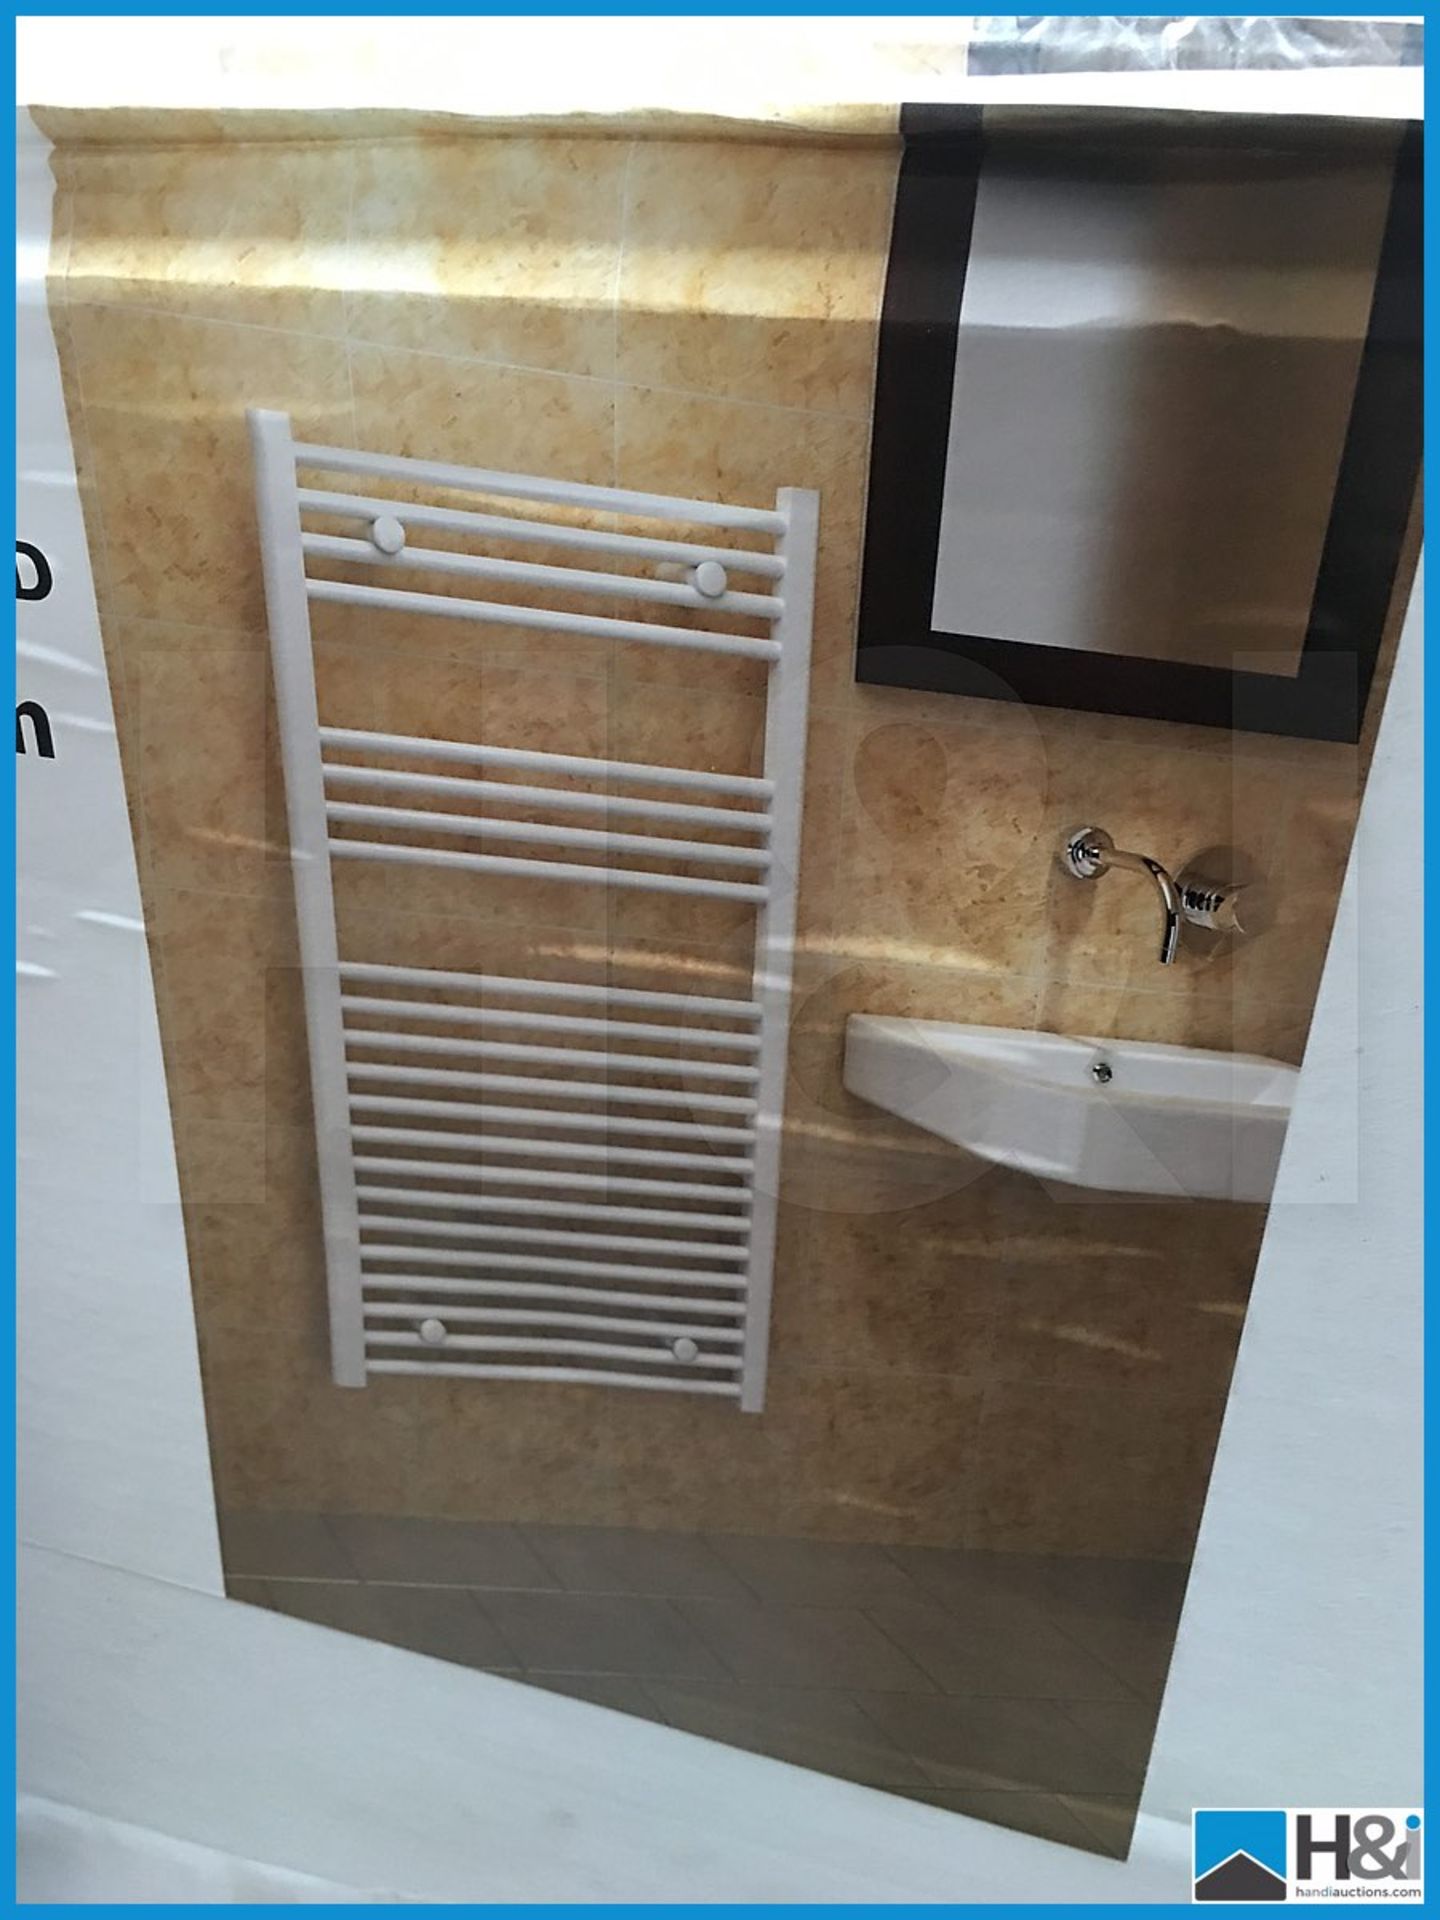 Designer Kudox Premium ladder towel rail 600x110 in white finish. New and boxed. Suggested